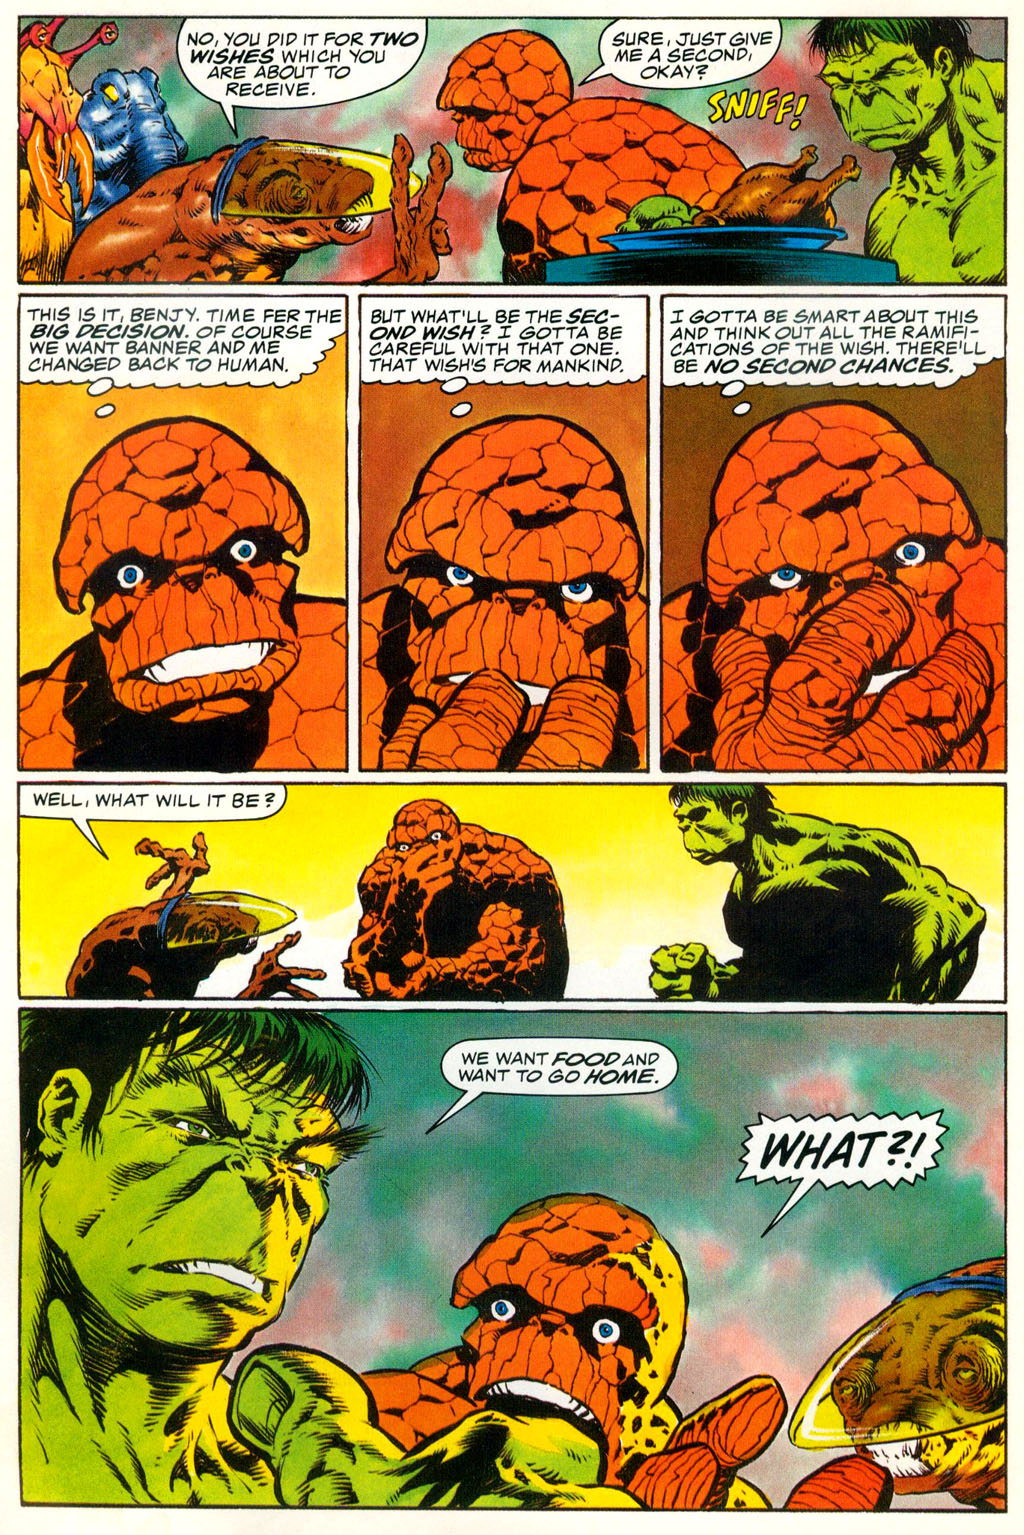 Read online Marvel Graphic Novel comic -  Issue #29 - Hulk & Thing - The Big Change - 67